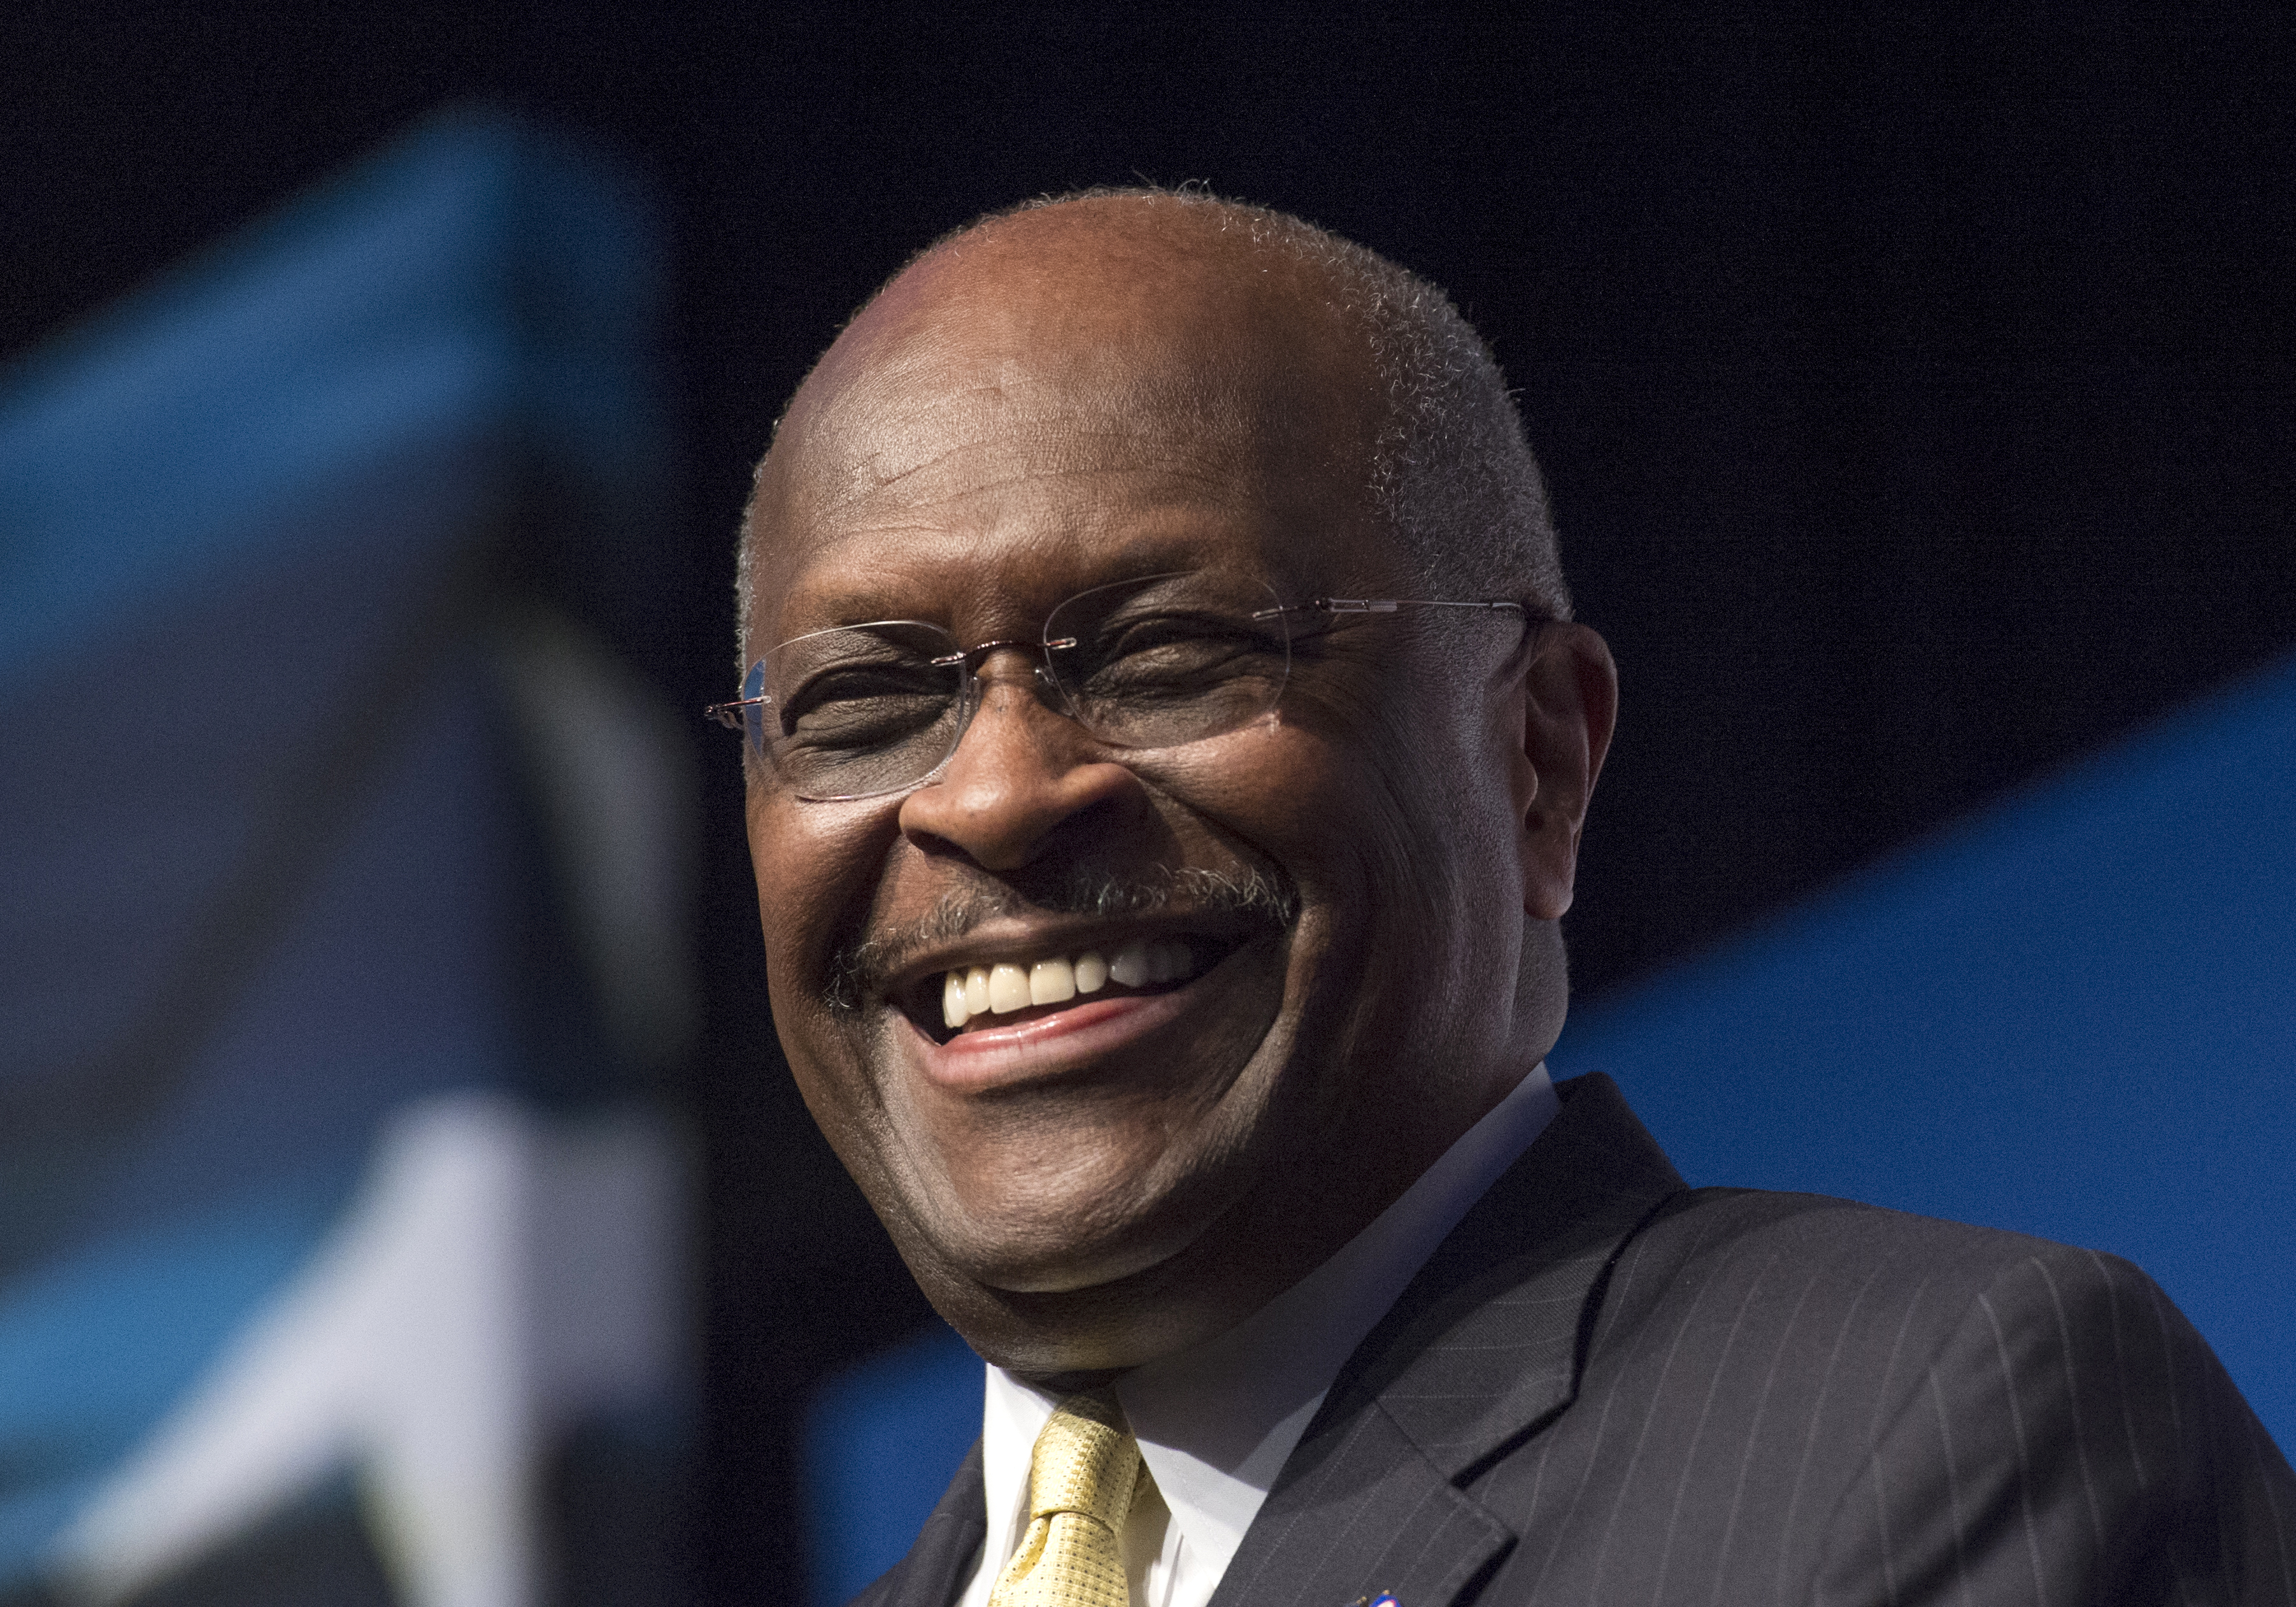 Herman Cain, CEO, The New Voice, speaks during Faith and Freedom Coalition's Road to Majority event in Washington on June 20, 2014. On Jan. 31, 2019 it was reported that President Donald Trump is considering Cain to fill one of the vacant seats on the Federal Reserve Board. (Molly Riley—AP)